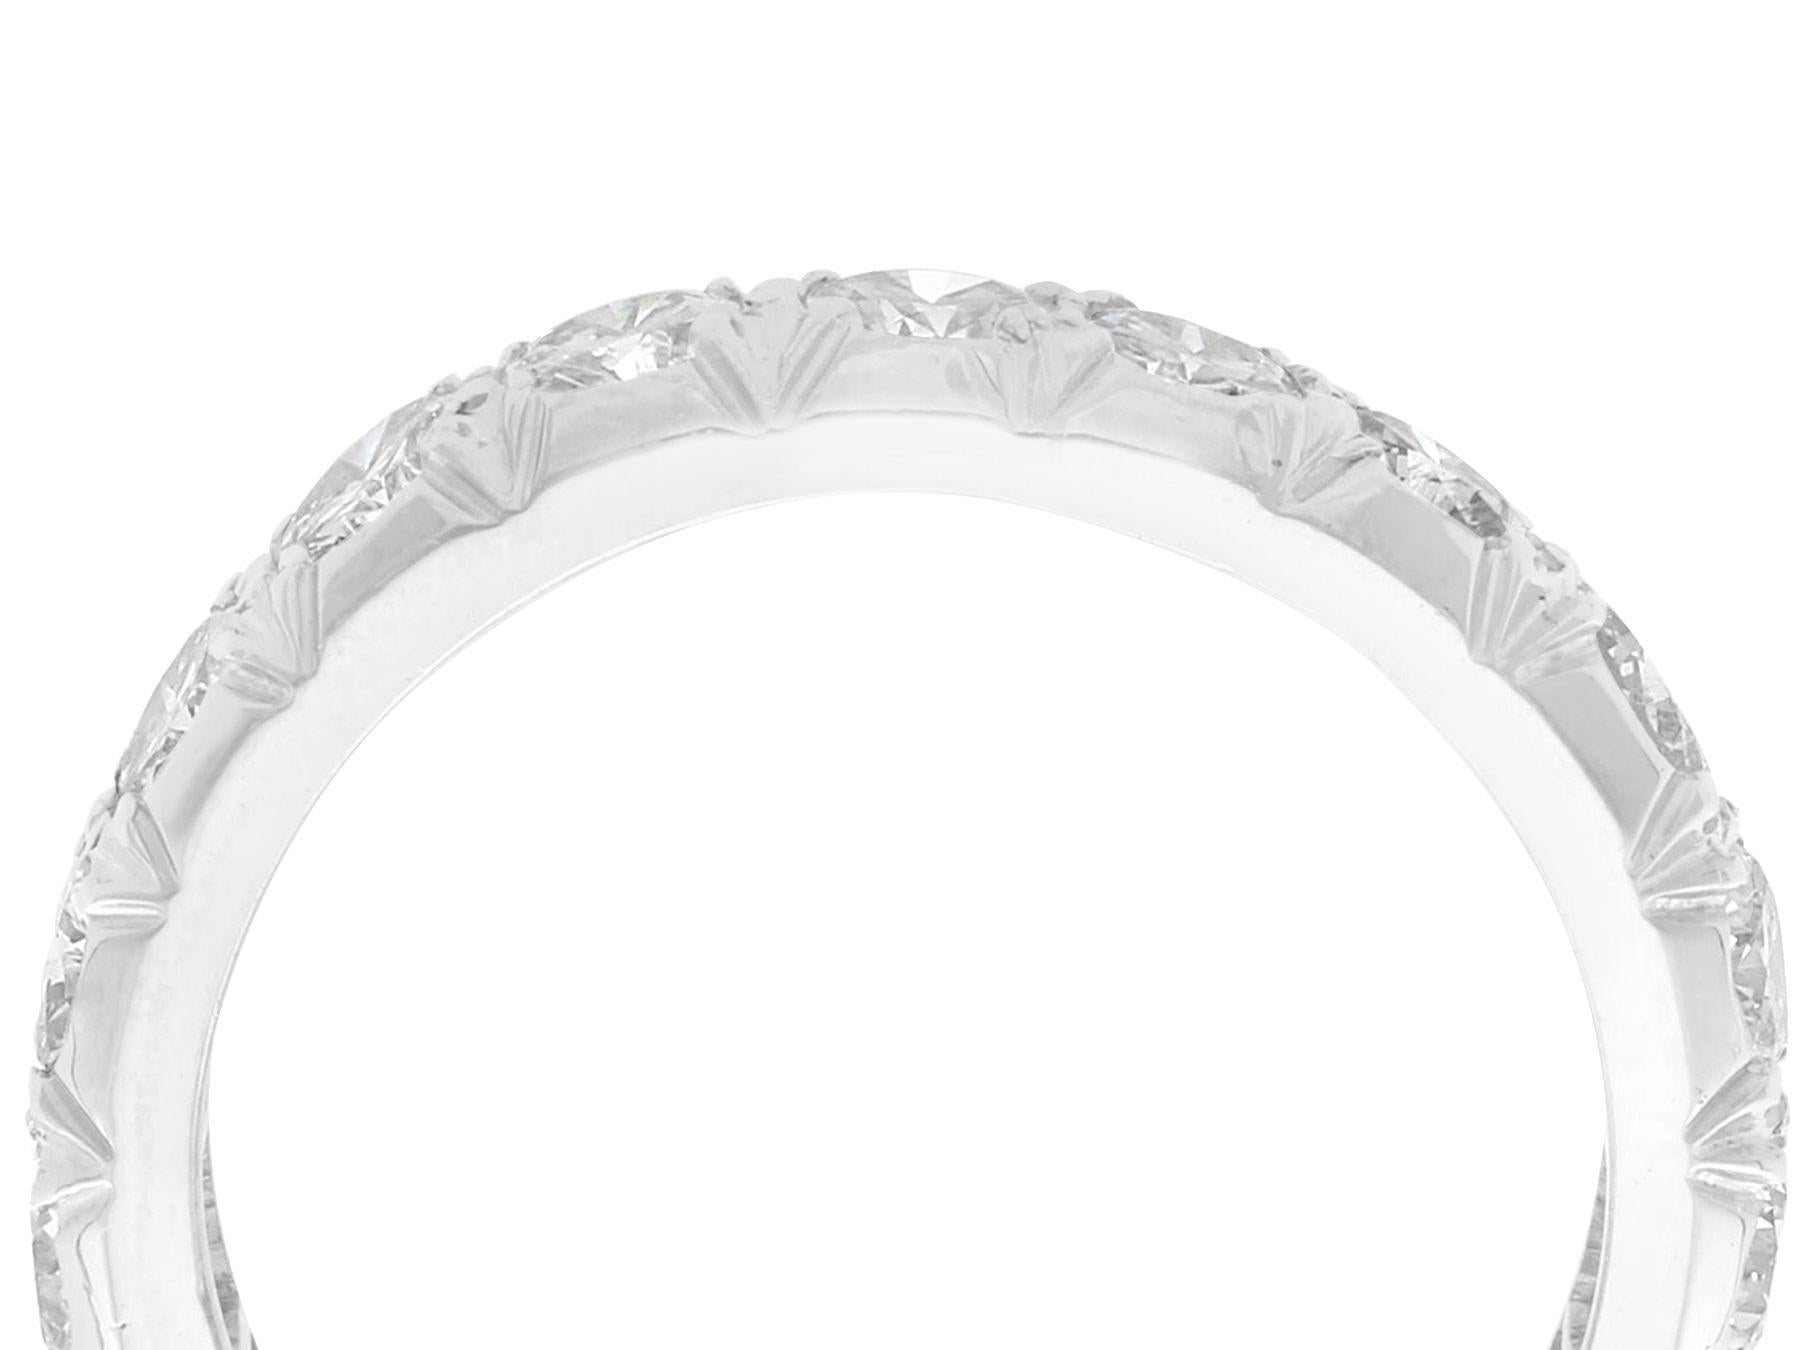 A stunning, fine and impressive 2.61 carat diamond and platinum full eternity ring; part of our diverse diamond jewelry and estate jewelry collections.

This stunning, fine and impressive antique full eternity ring has been crafted in platinum.

The